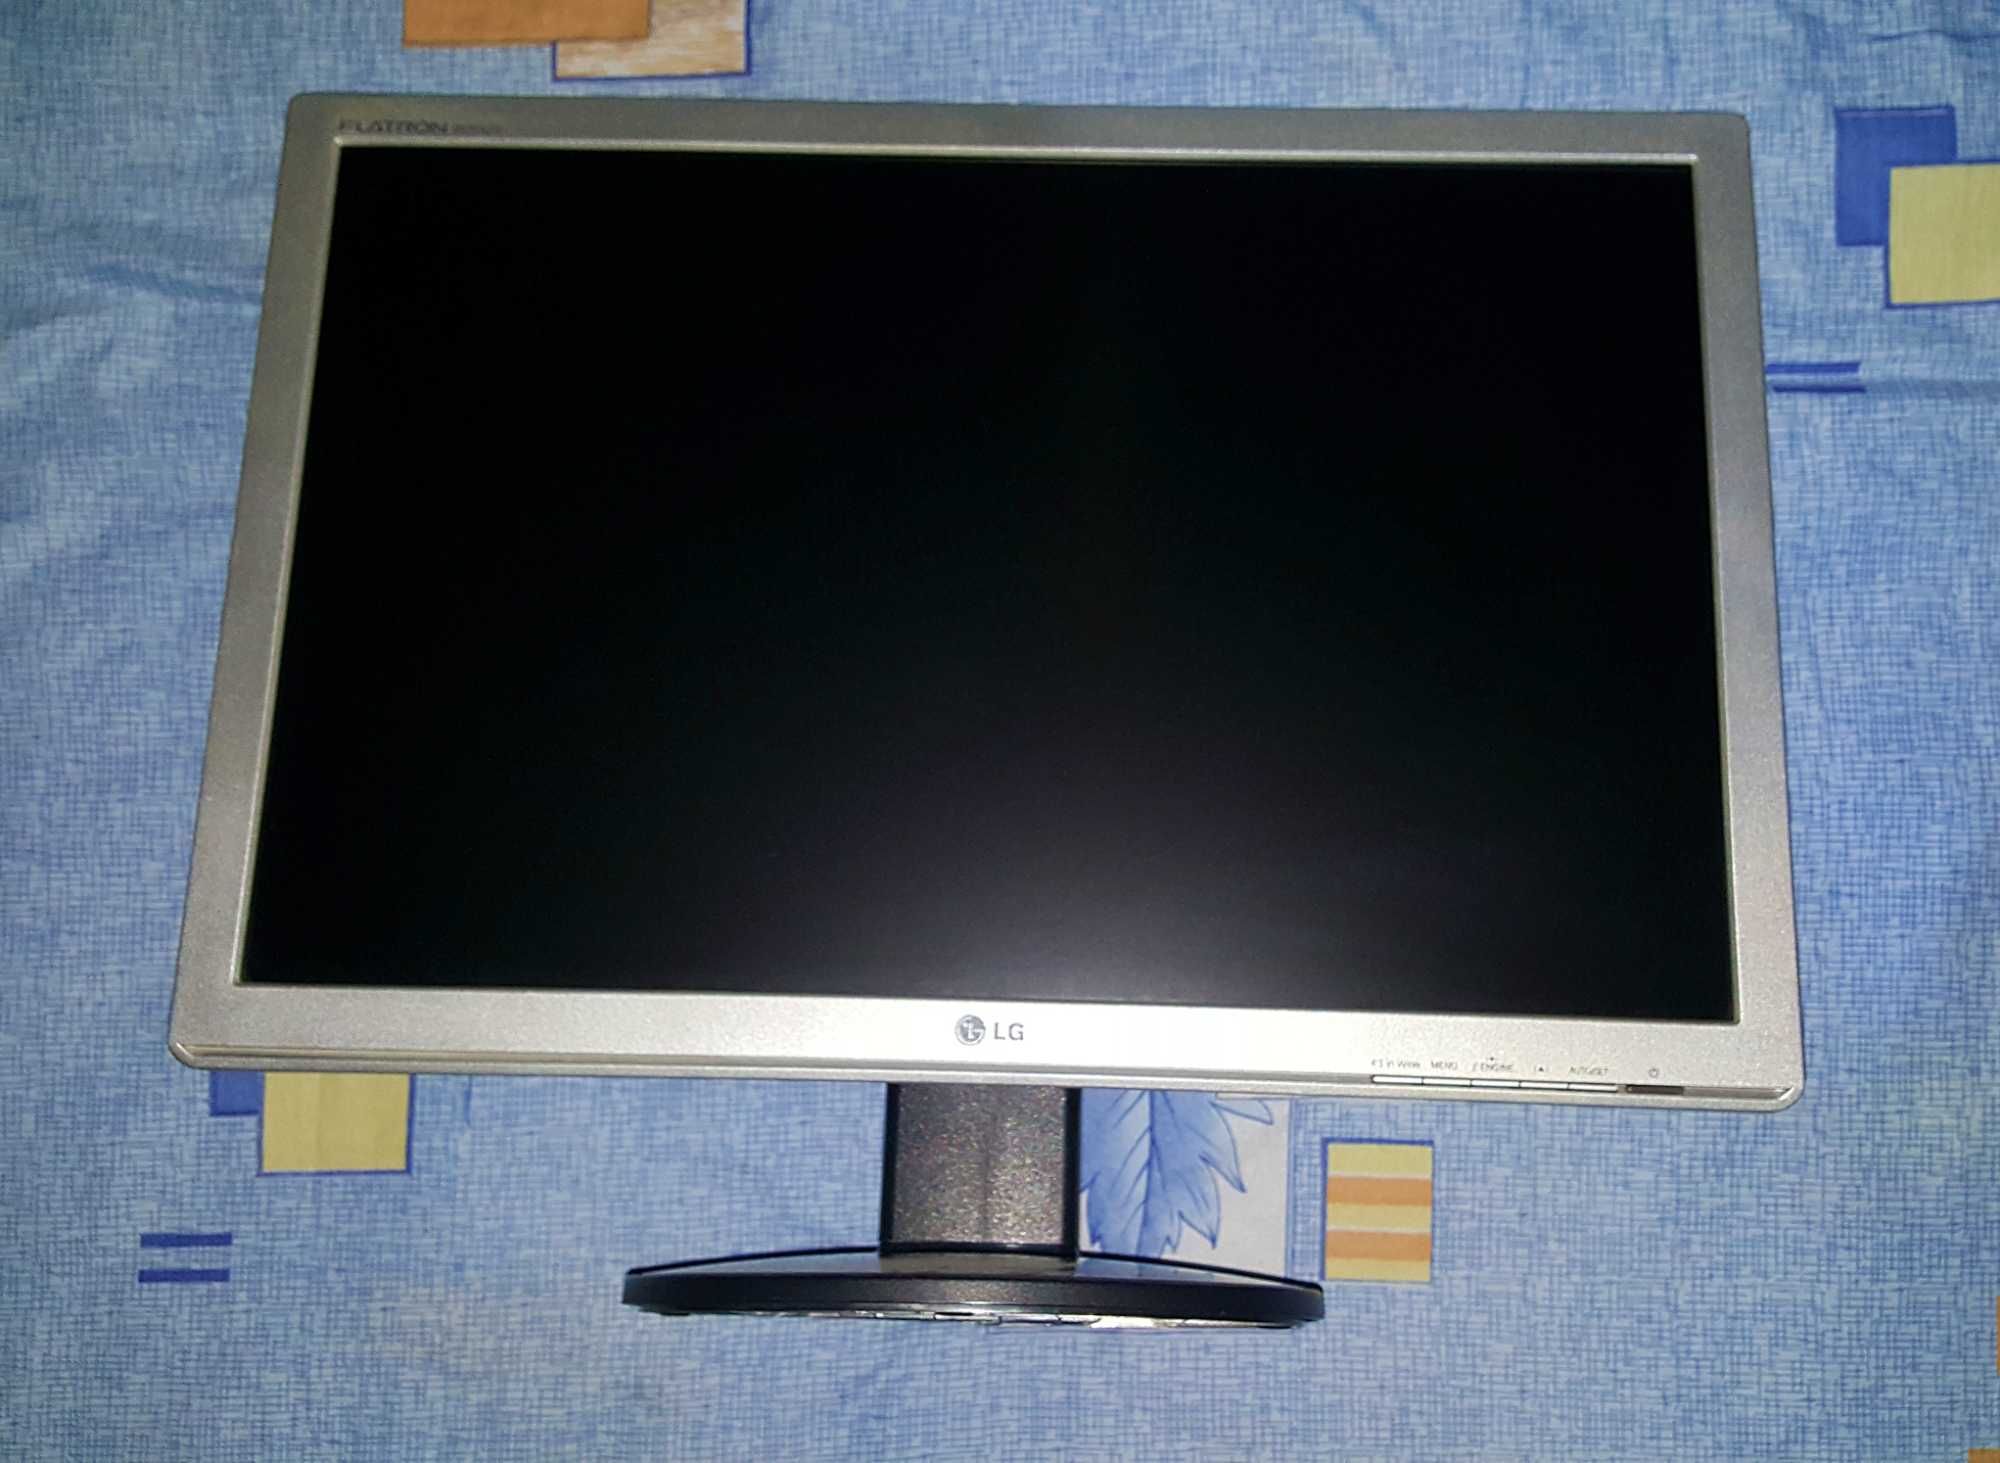 Vand monitor LG W2242S-SF, 22 inch, defect.